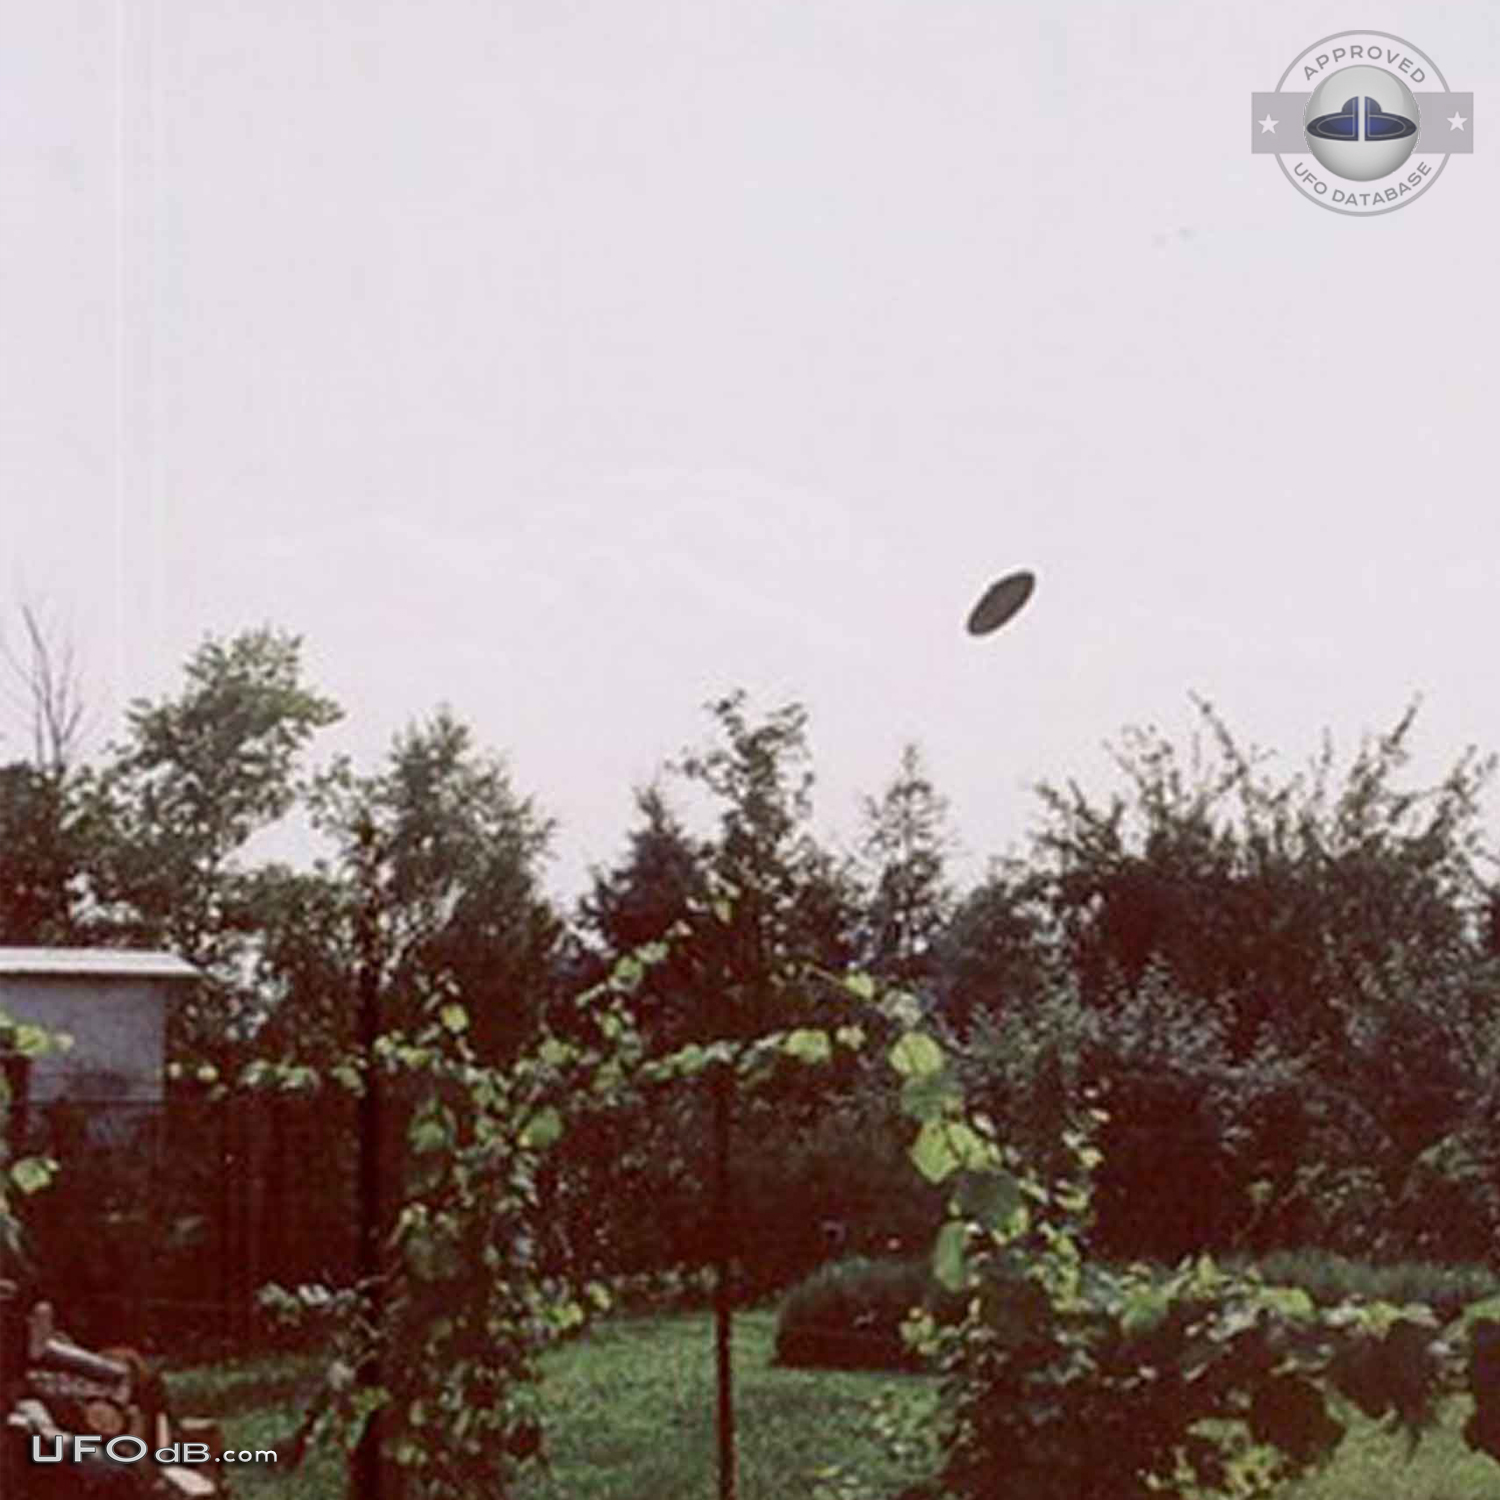 Poland 2003 Ufo sighting get aircrafts dispatched to check out the ufo UFO Picture #379-5